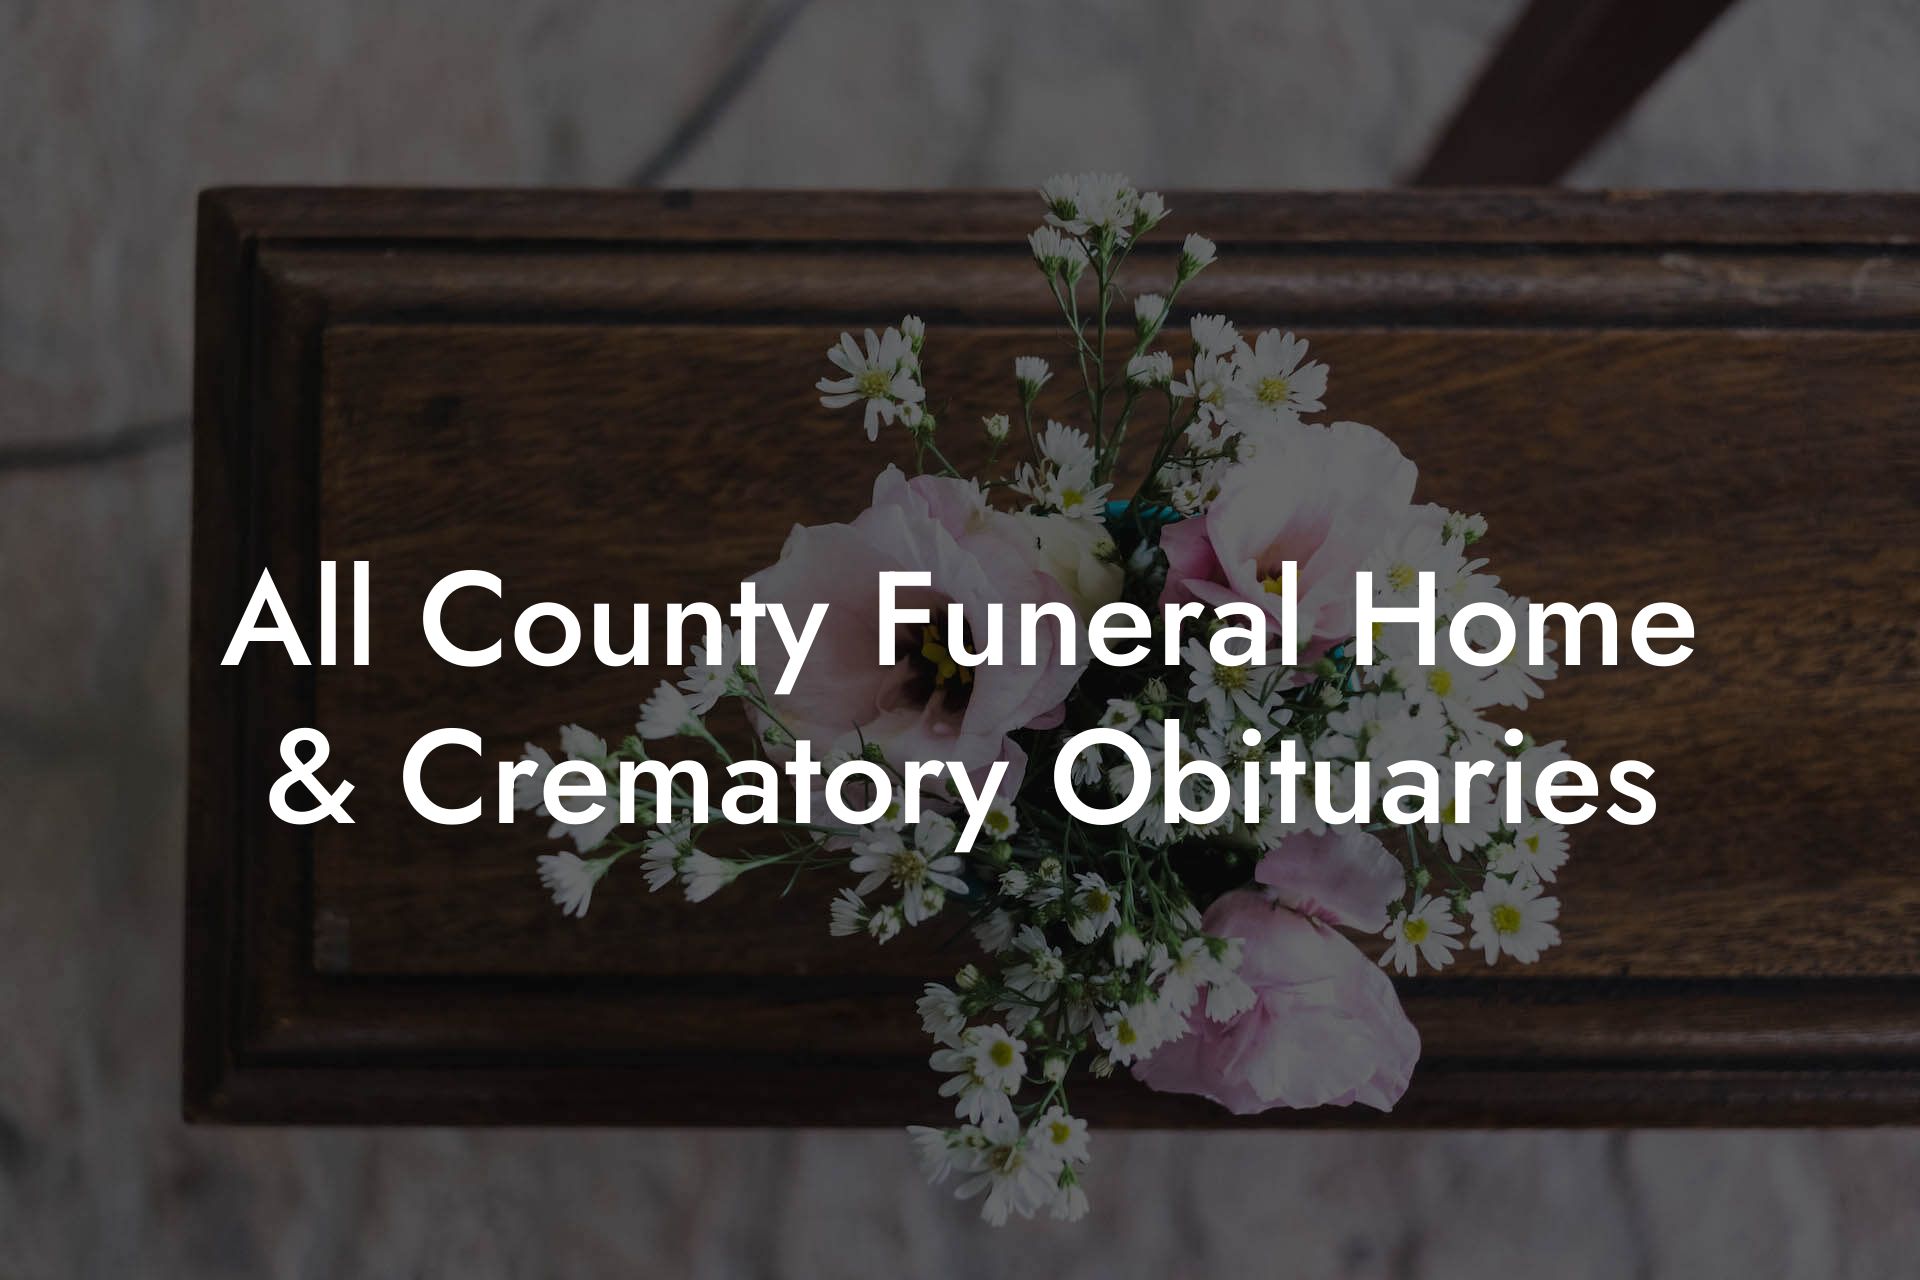 All County Funeral Home & Crematory Obituaries